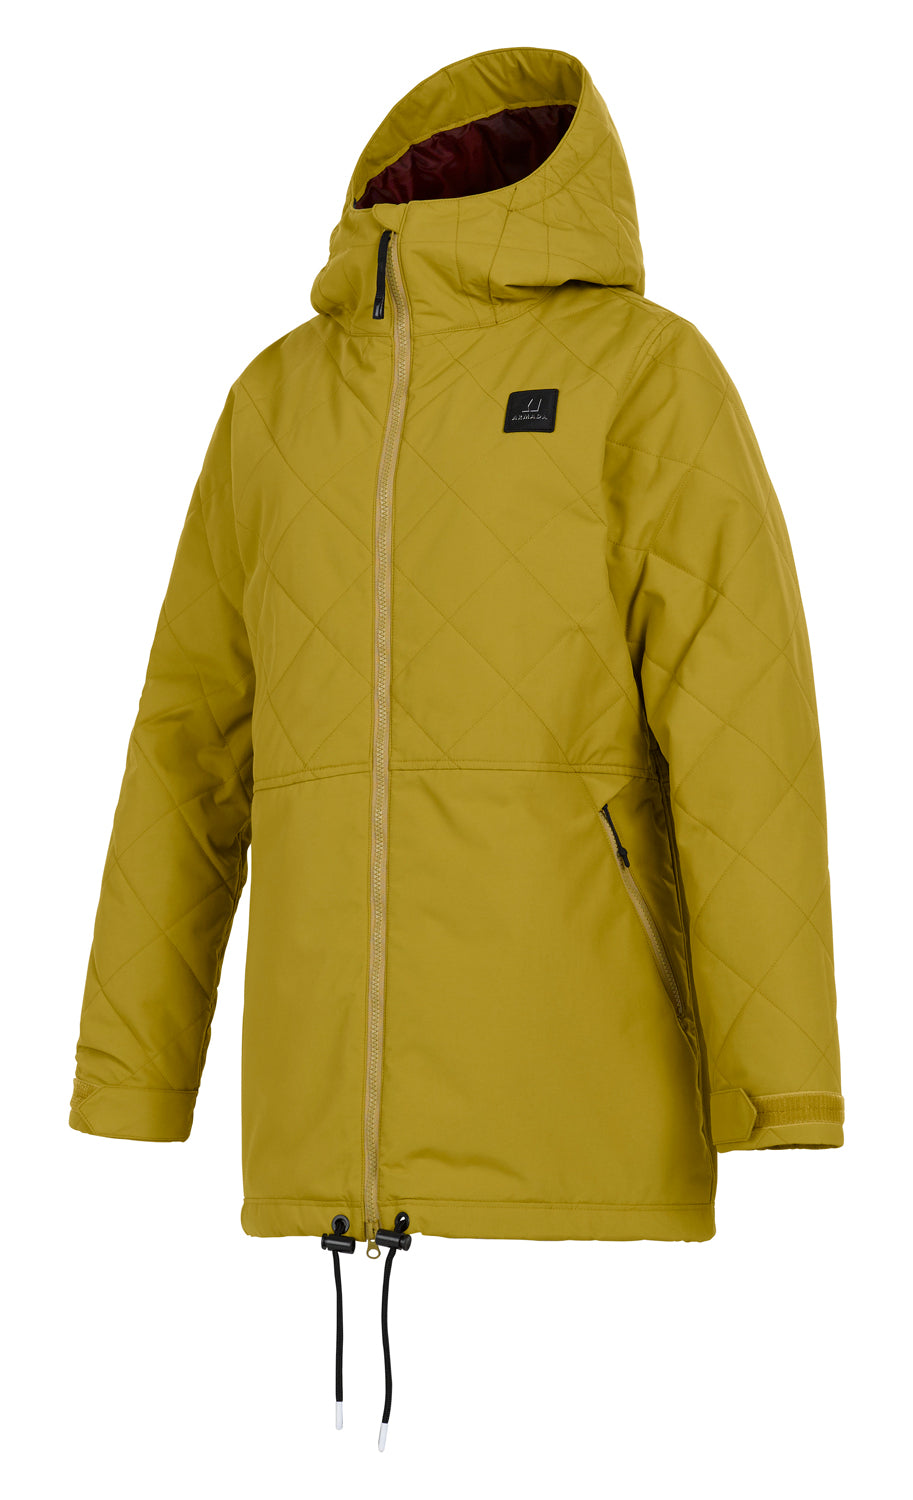 Sterlet Insulated Jacket